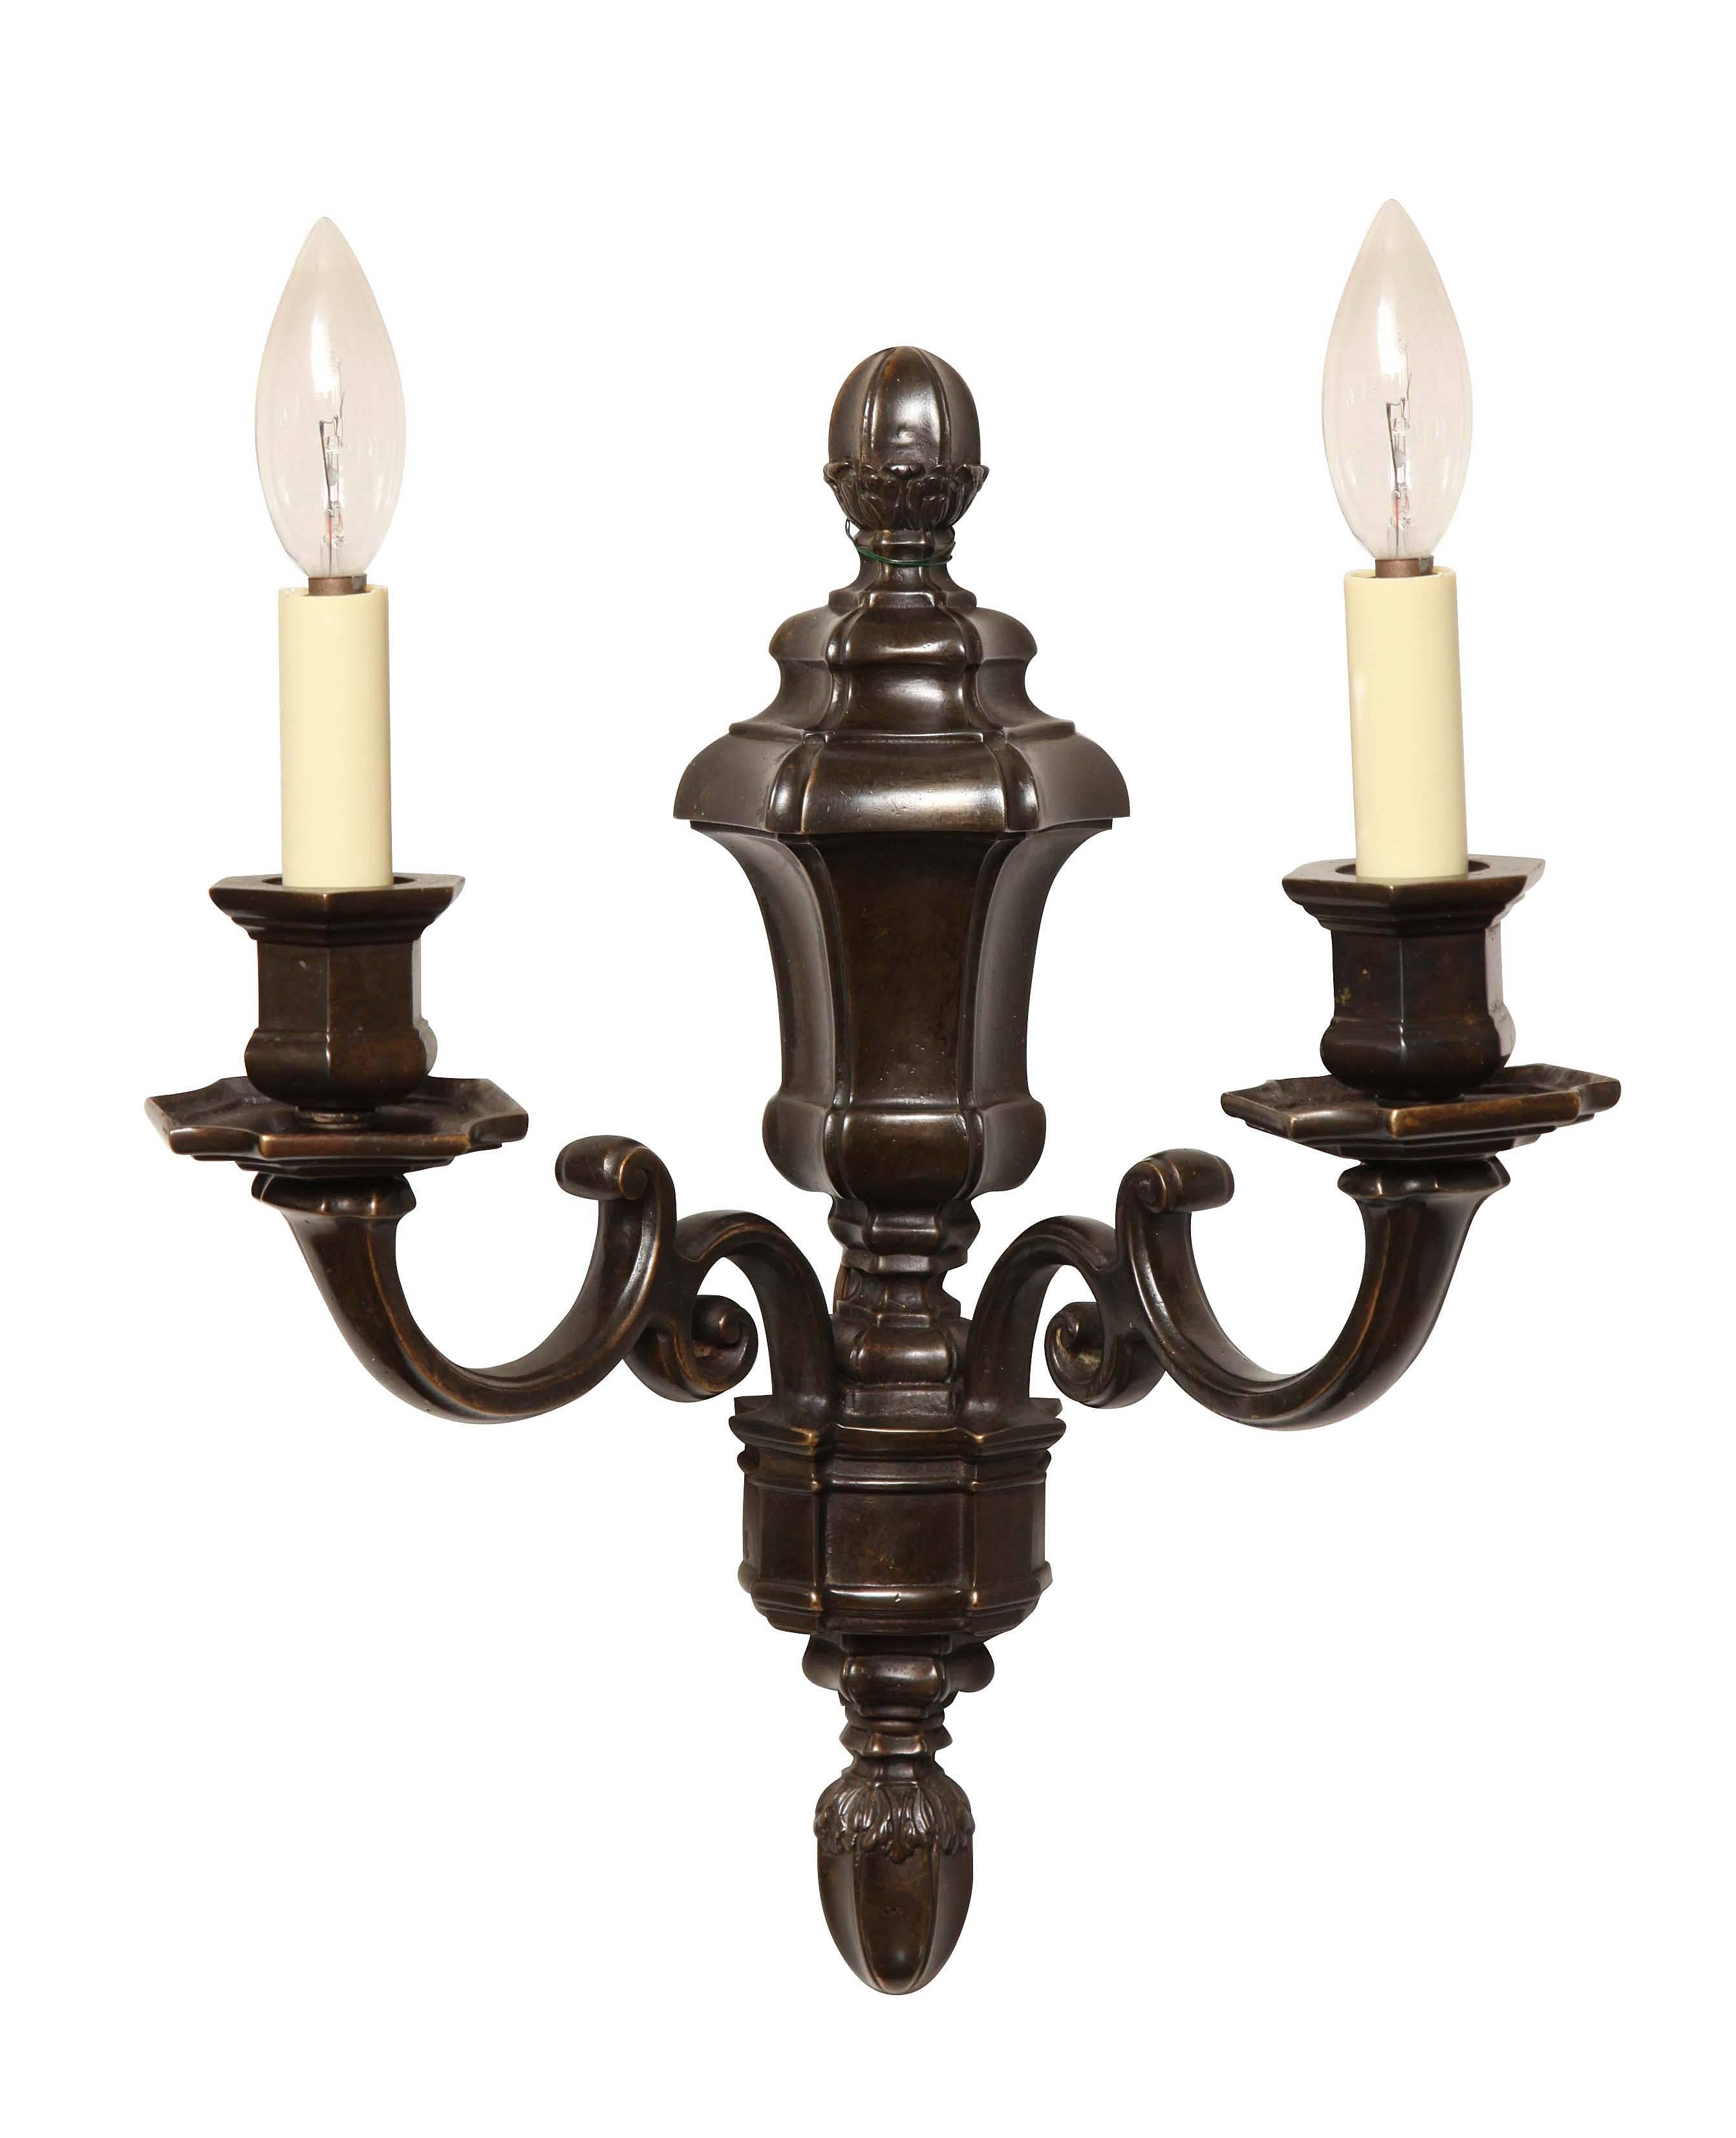 A pair of Dutch style, two-light patinated-bronze sconces by Edward F. Caldwell & Co, New York.